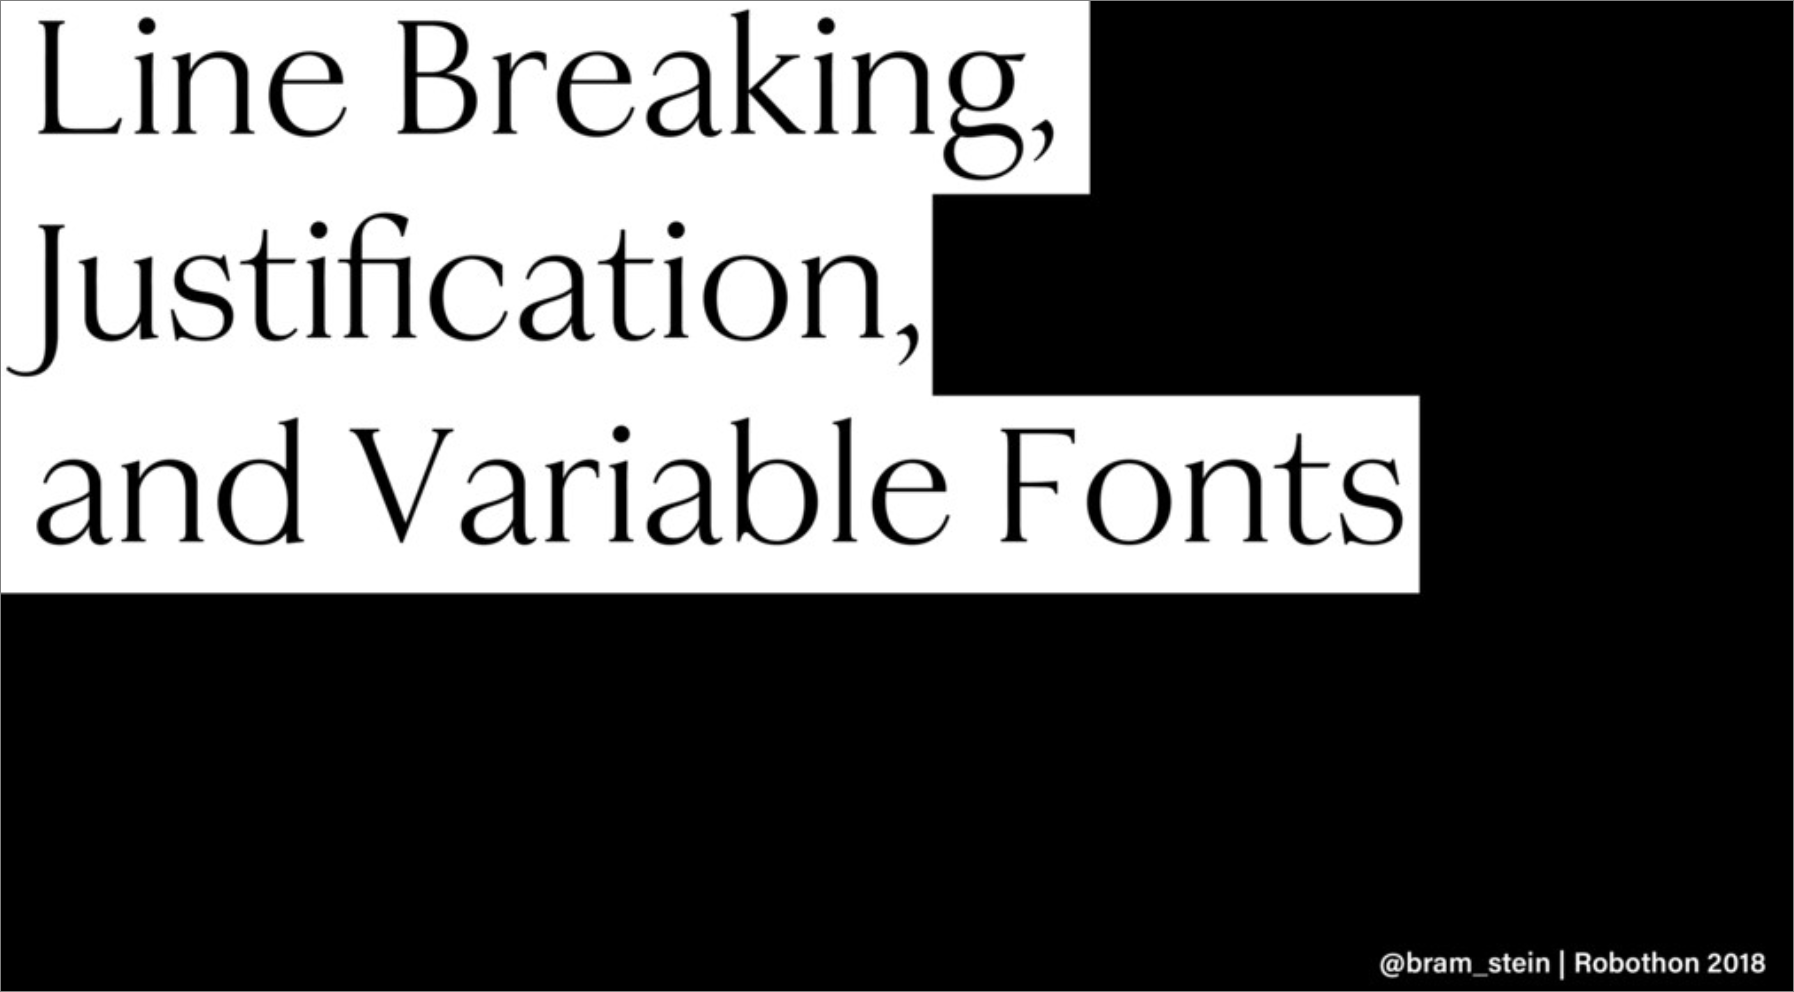 Line Breaking, Justification, and Variable Fonts opening slide